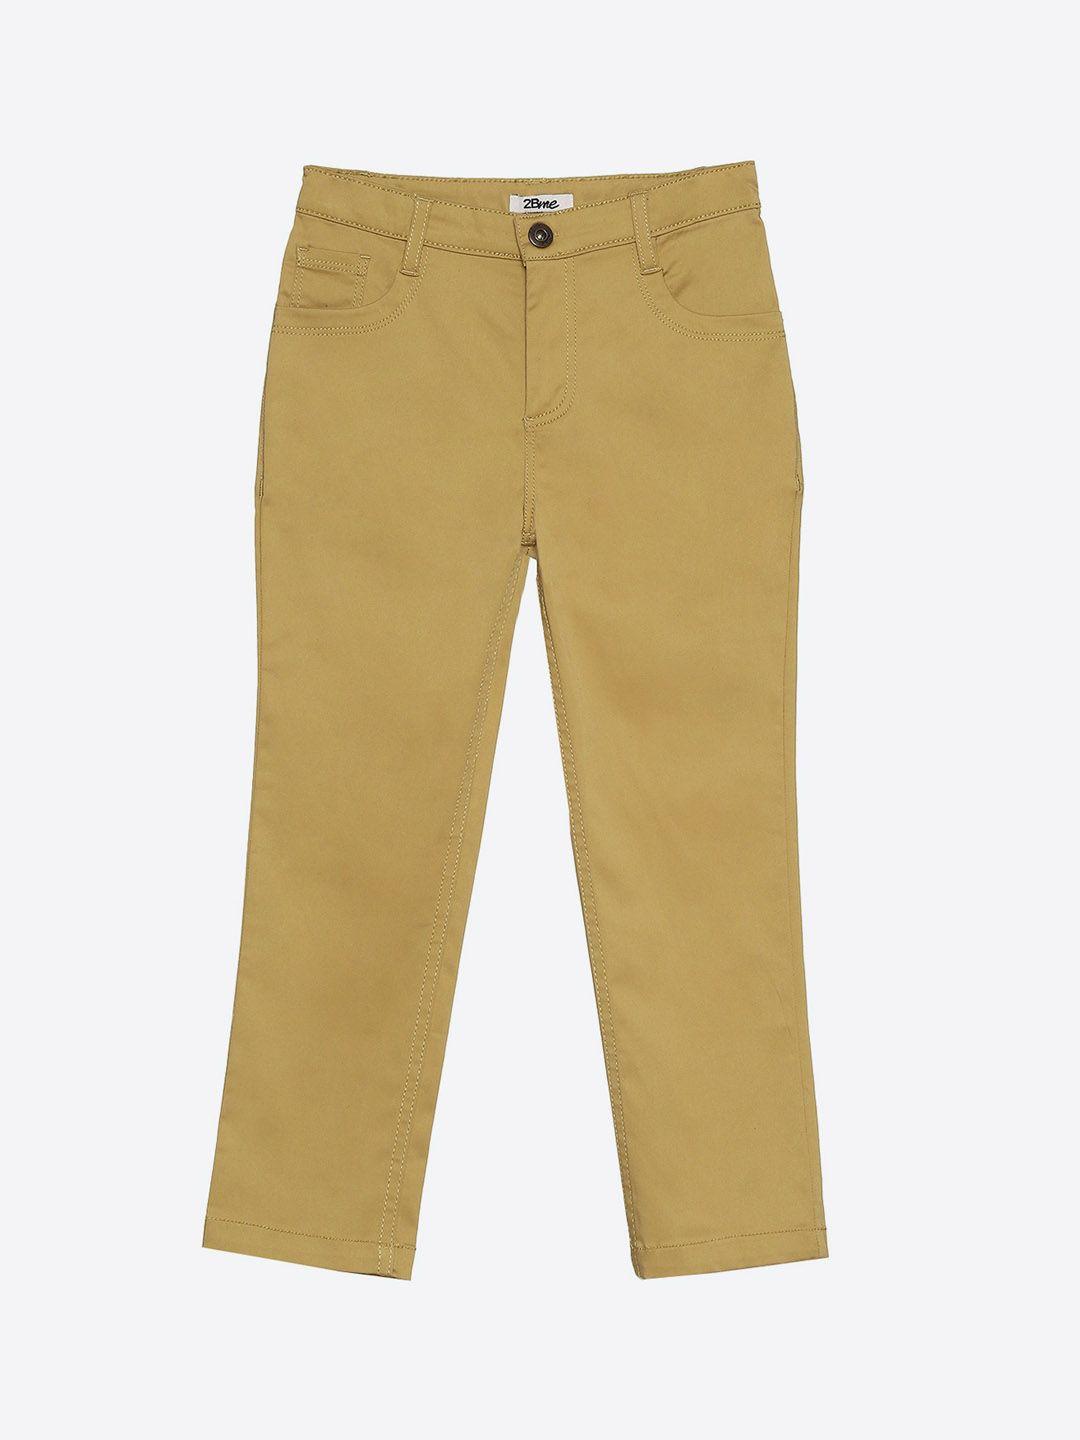 2bme boys mid-rise flat-front cotton trousers chinos trousers